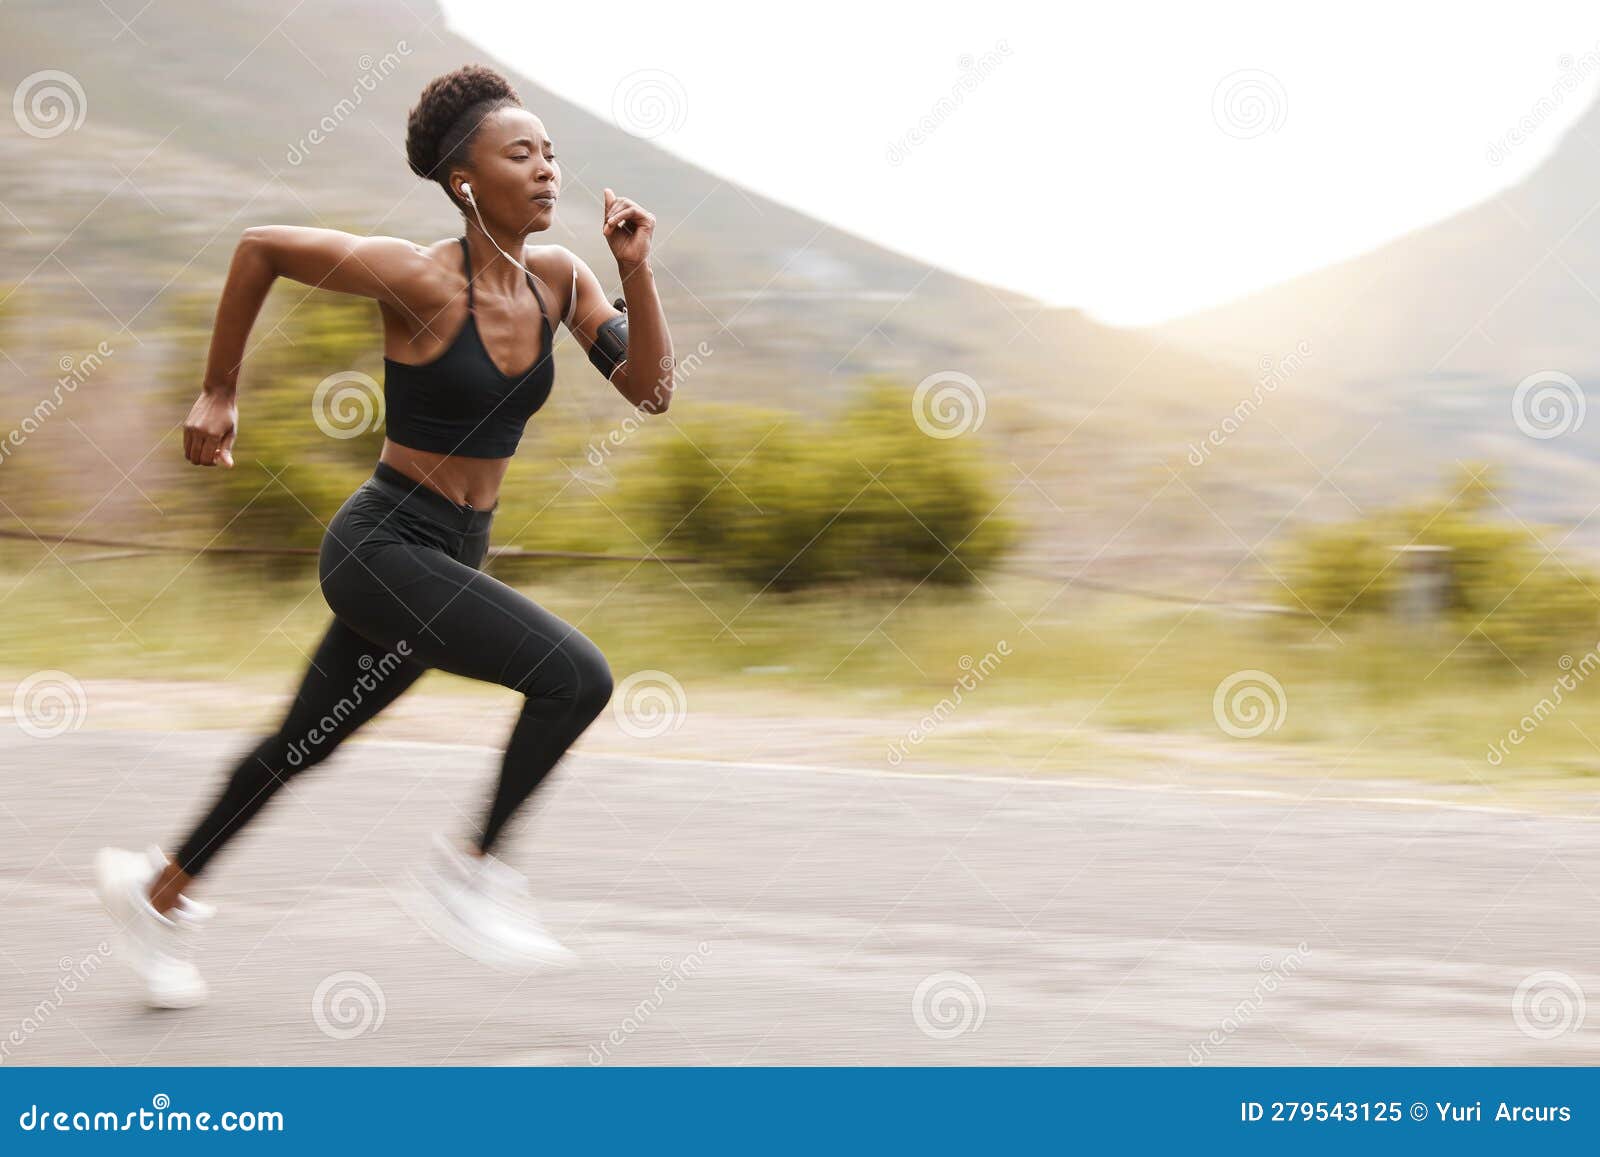 Athlete, Speed and Fast Black Woman Running and Training for Outdoor  Sports, Workout and Exercise for a Marathon. Strong Stock Image - Image of  alone, female: 279543125